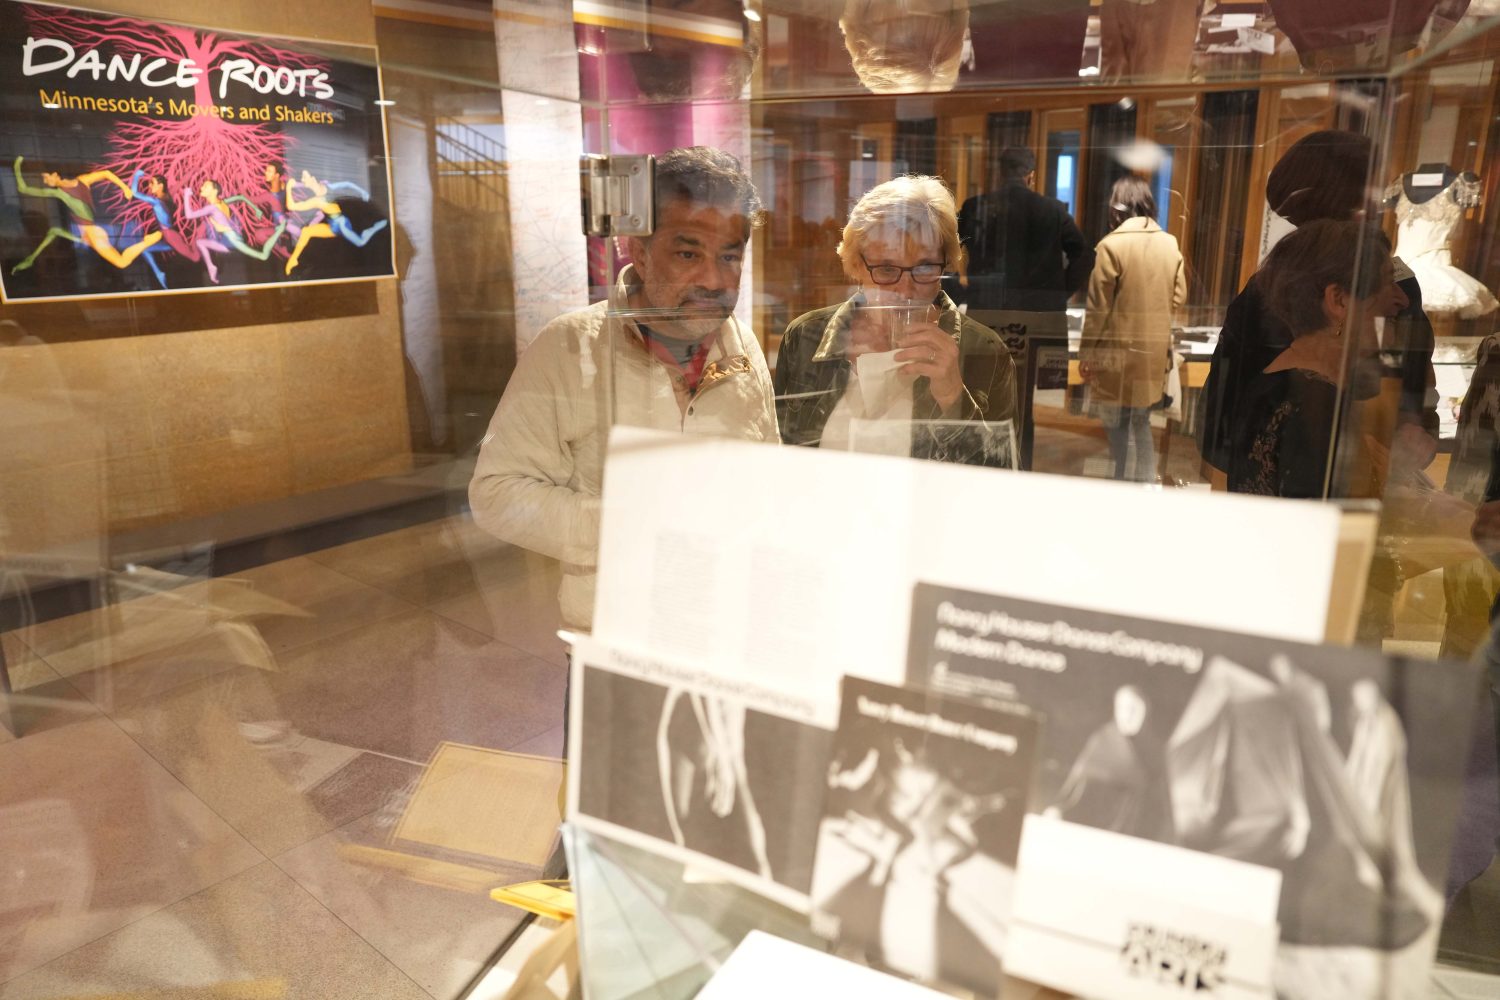 Attendees browse the display cases at the opening of PAA's "Dance Roots" exhibit, on Oct. 27, 2023. Exhibit designed by Darren Terpstra. (Photo/Luke Logan)